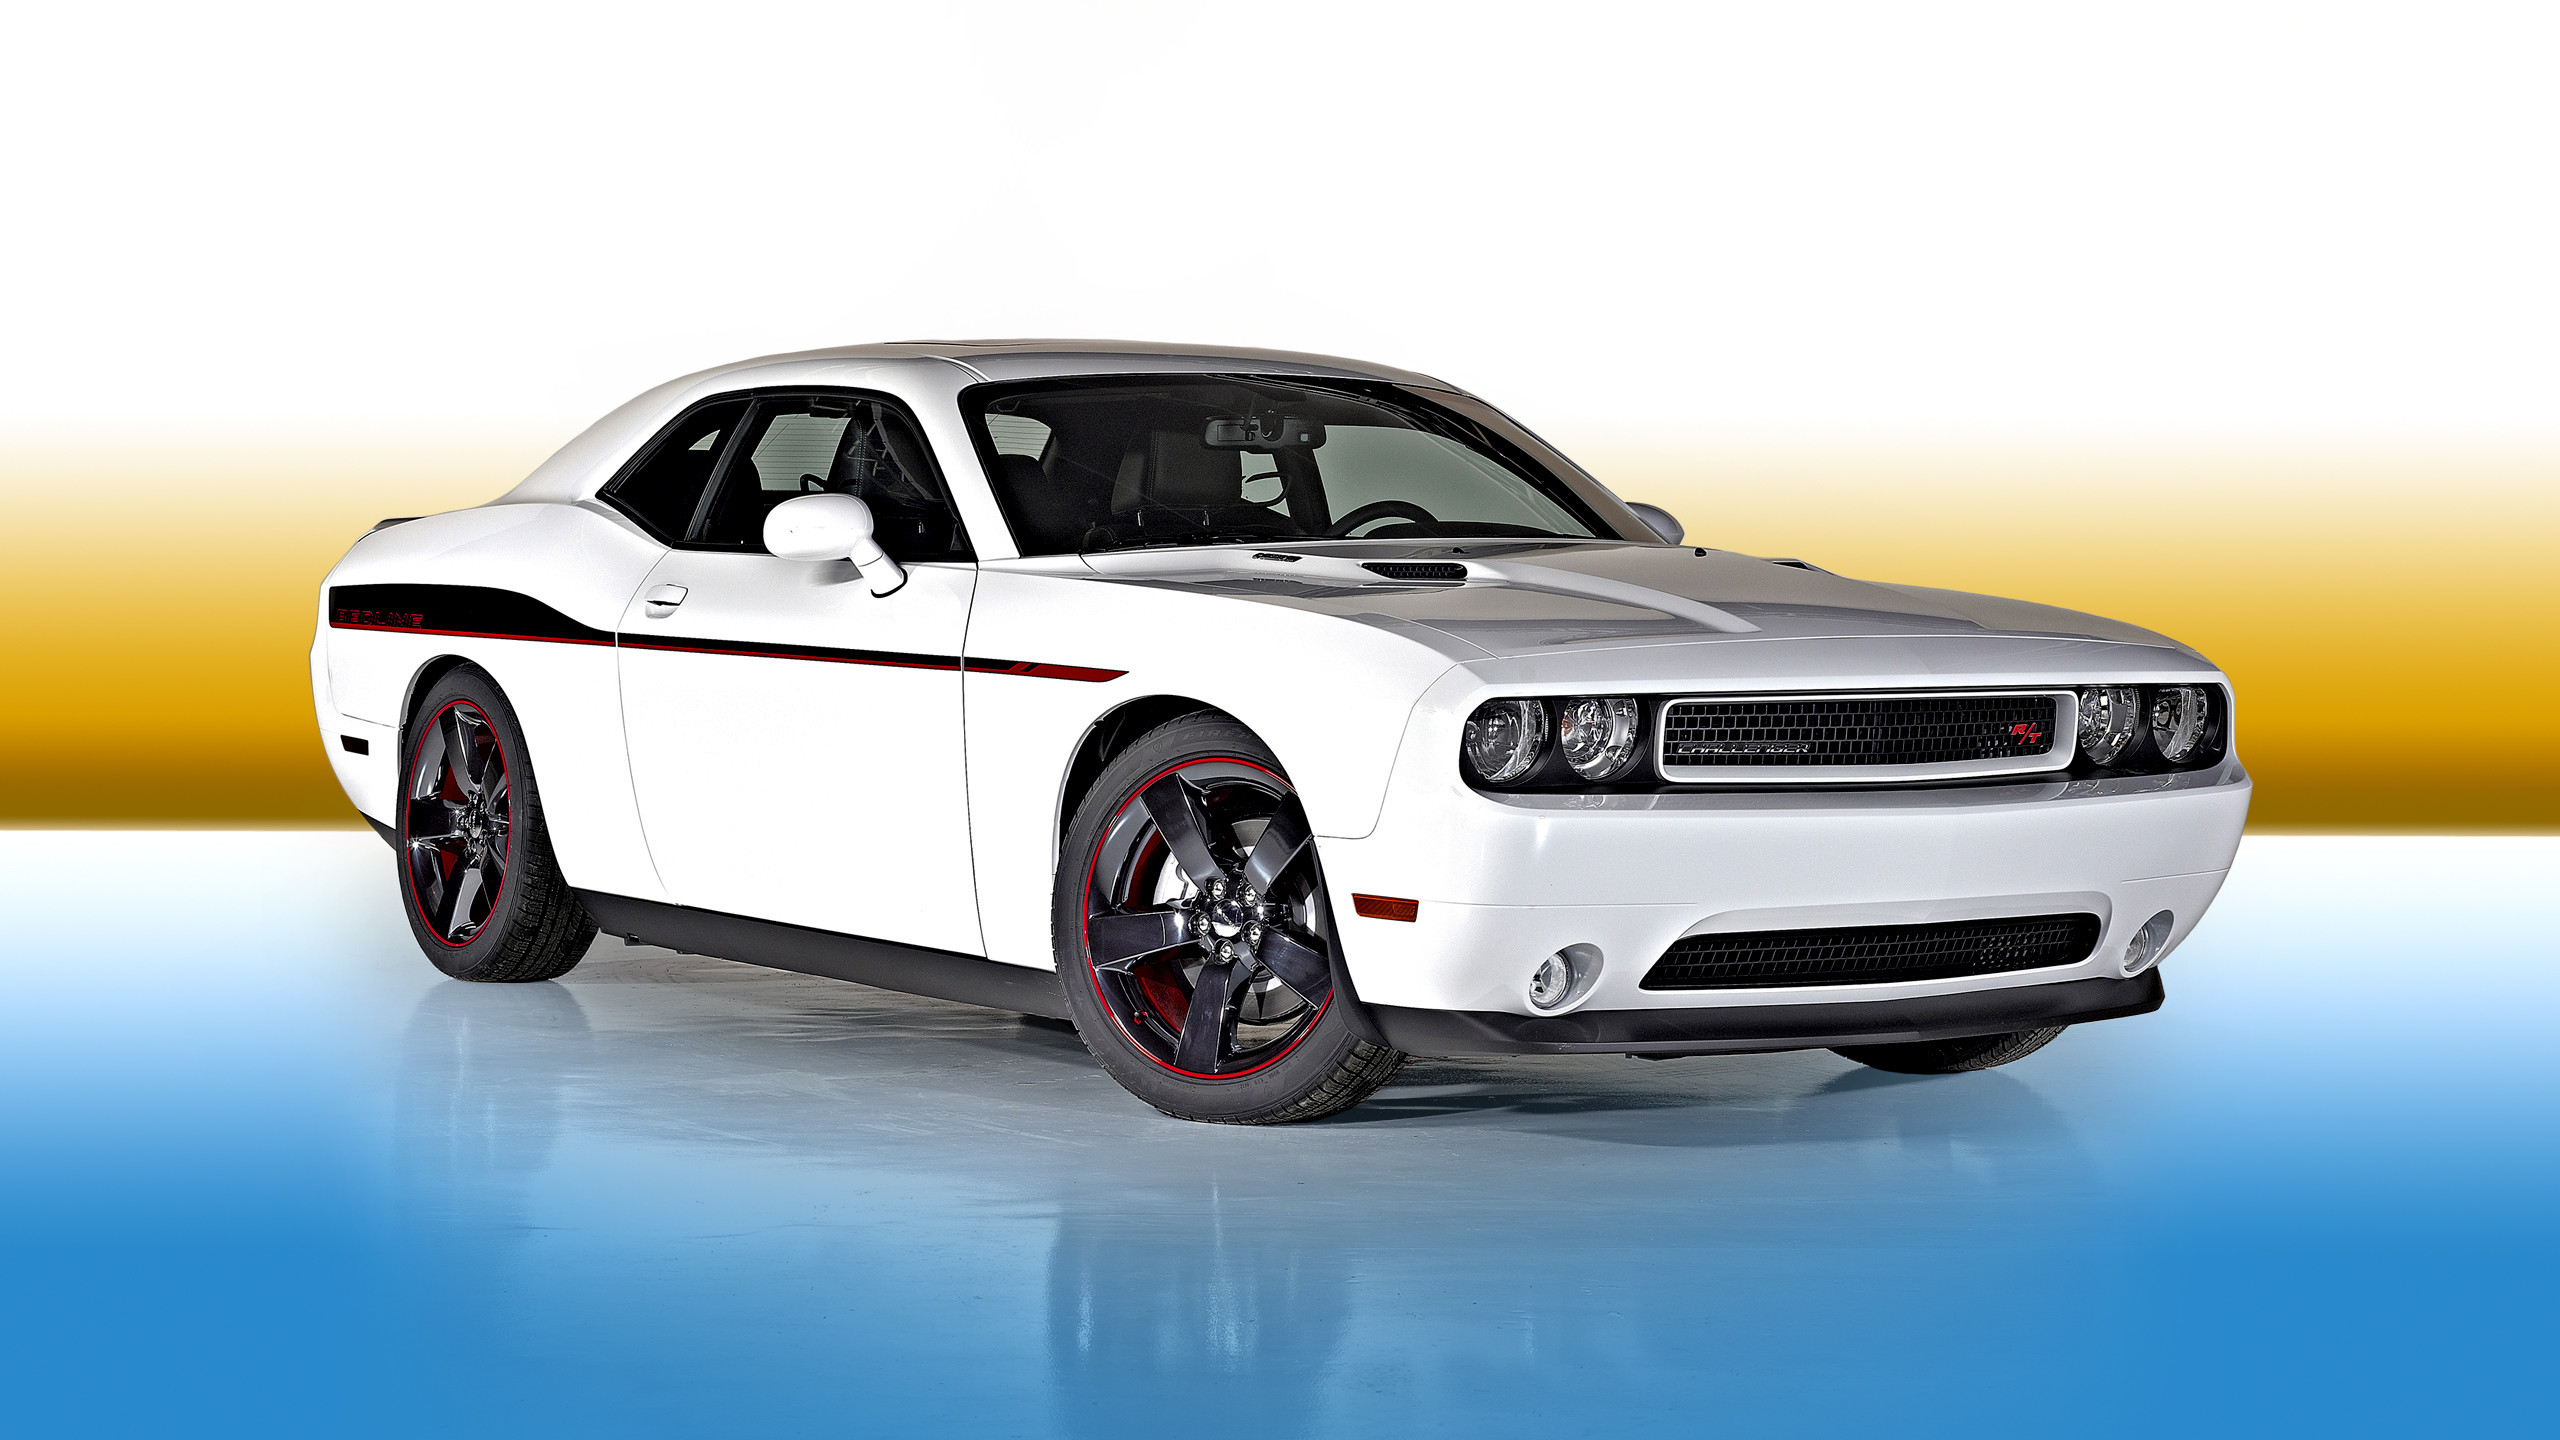 2560x1440 Tags: Dodge Challenger 2015